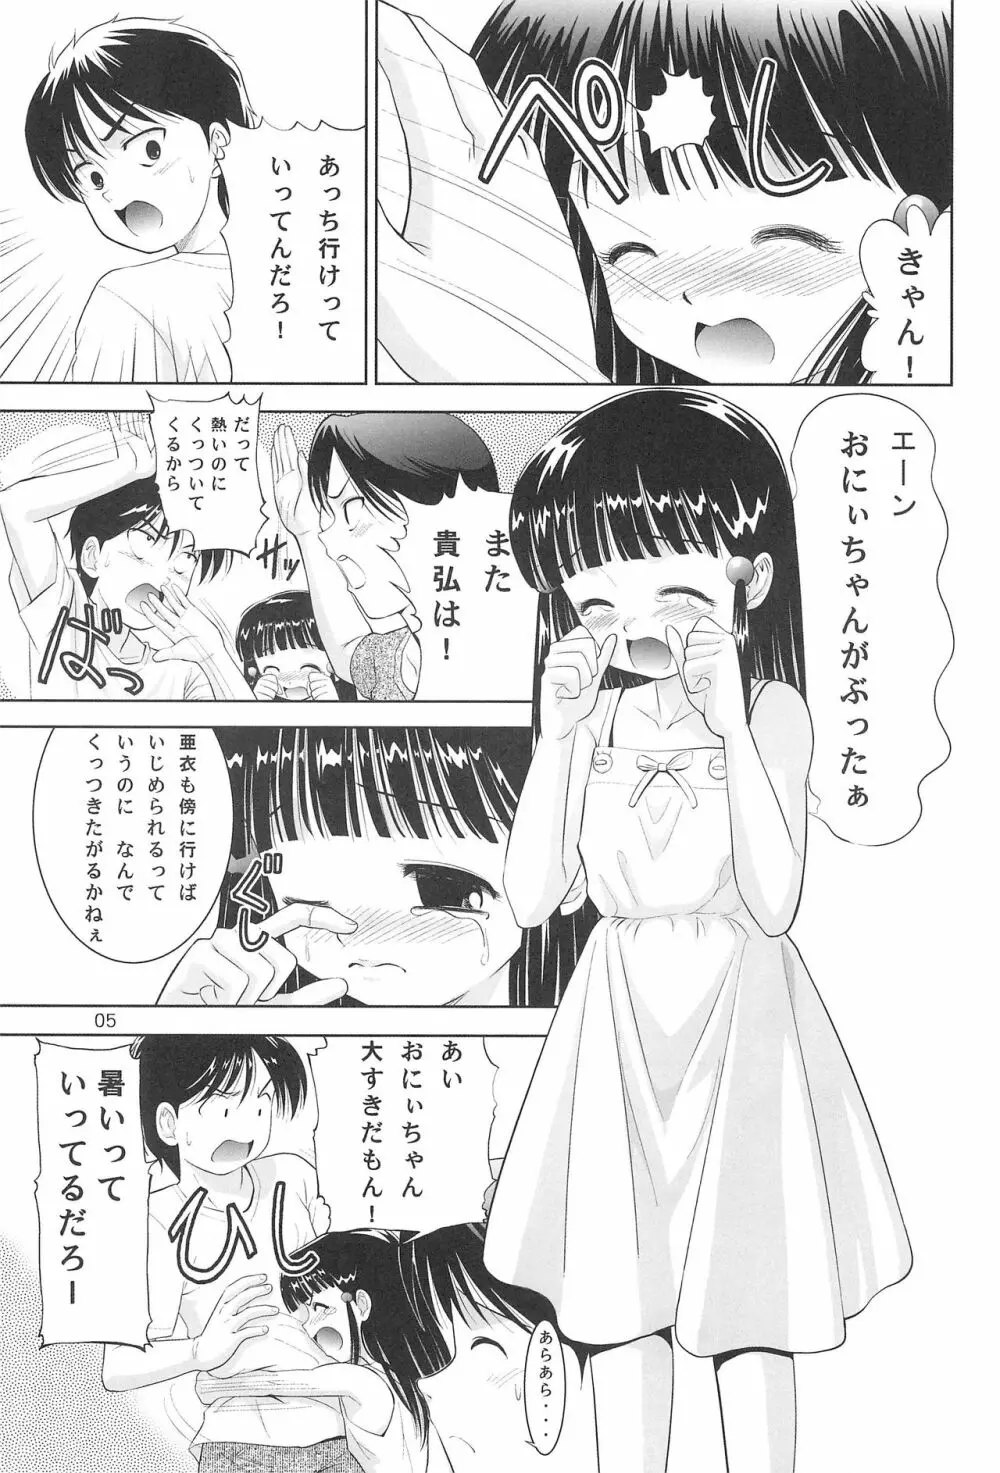 Little Lovers 6 - 水辺の少女 Page.4